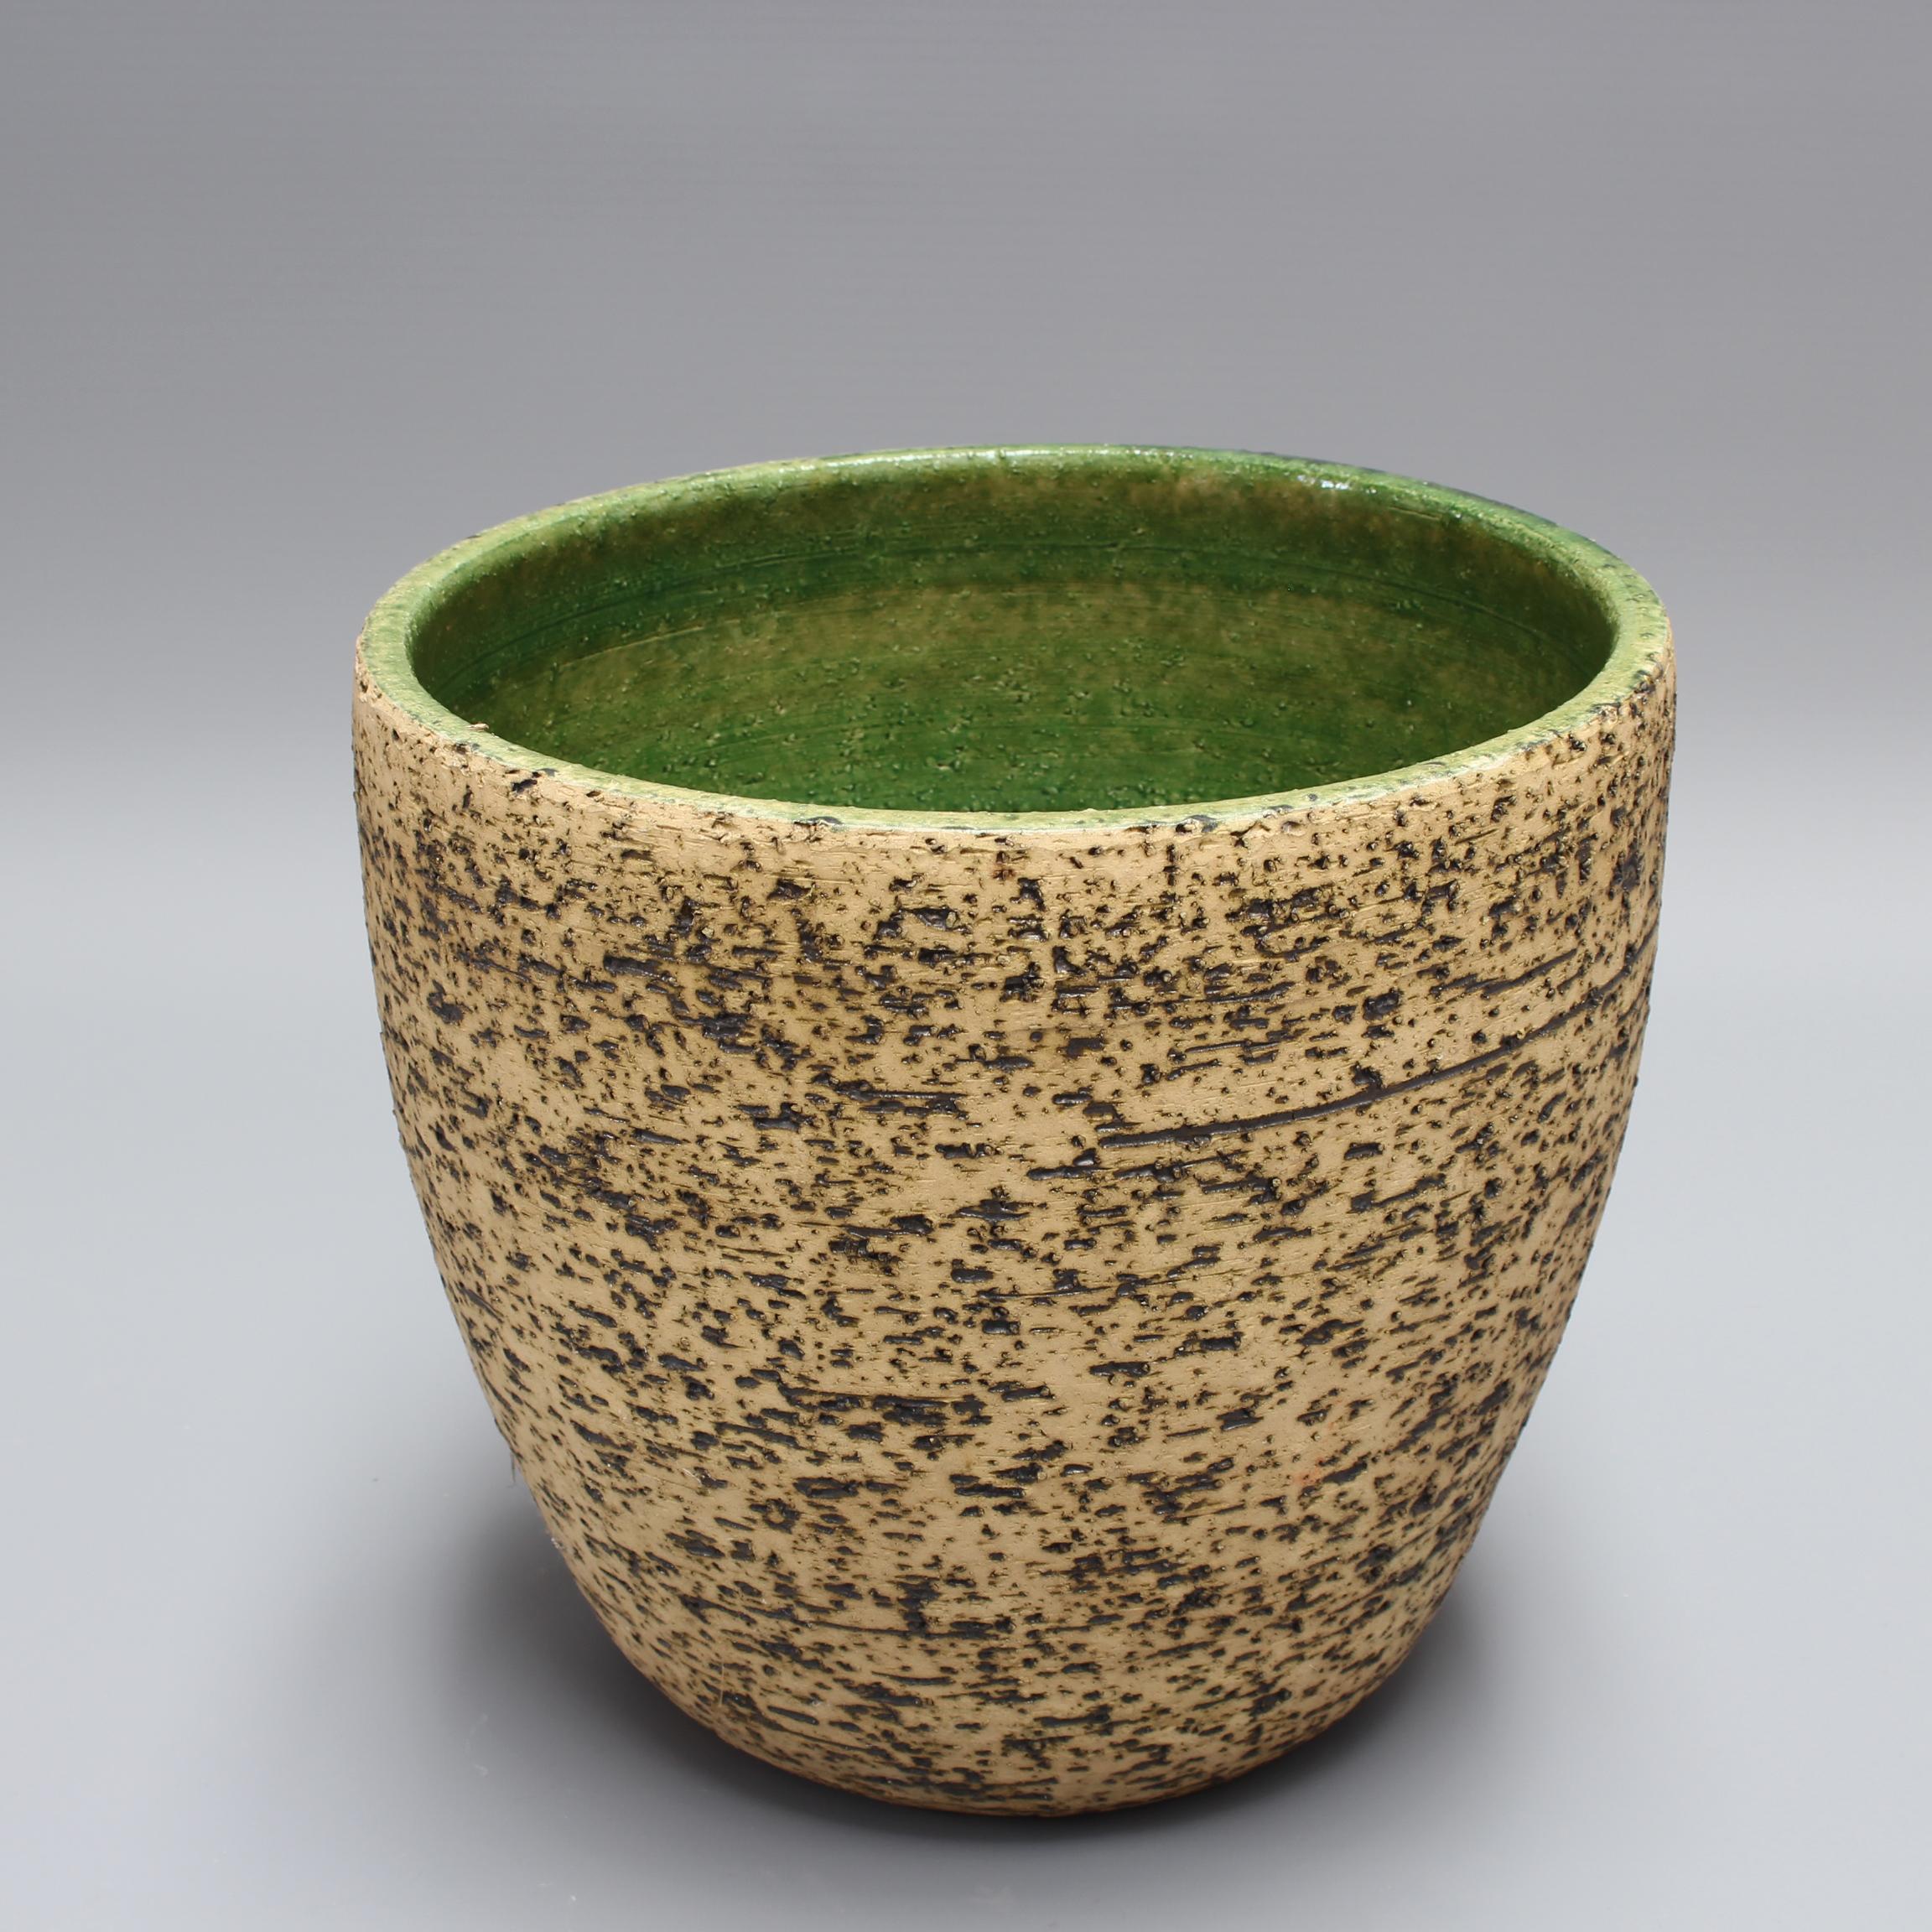 Vintage European earthenware cachepot (circa 1970s). A very rustic piece with a sandy matt hue accented by incised darker markings encircling the body up to the lip. The lip and the interior are green and smoother to the touch contrasting with the